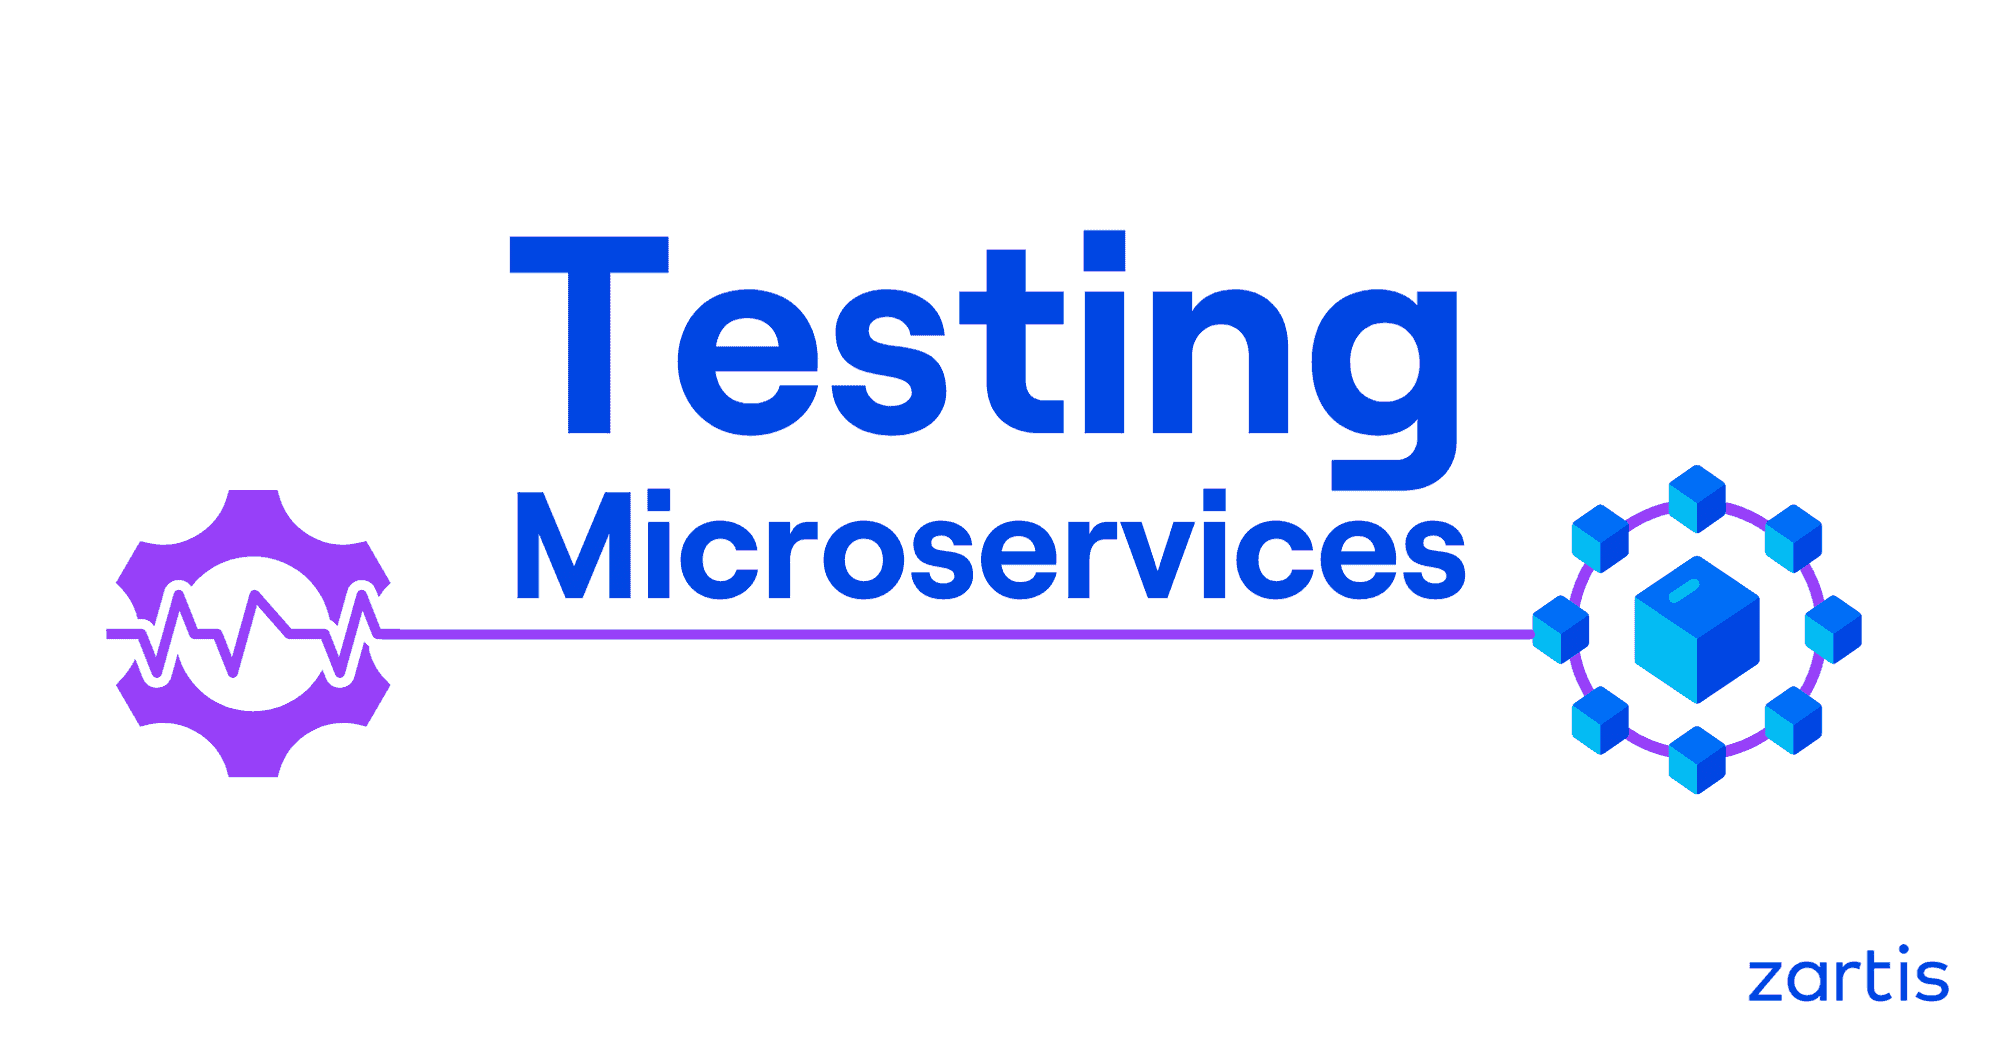 testing microservices